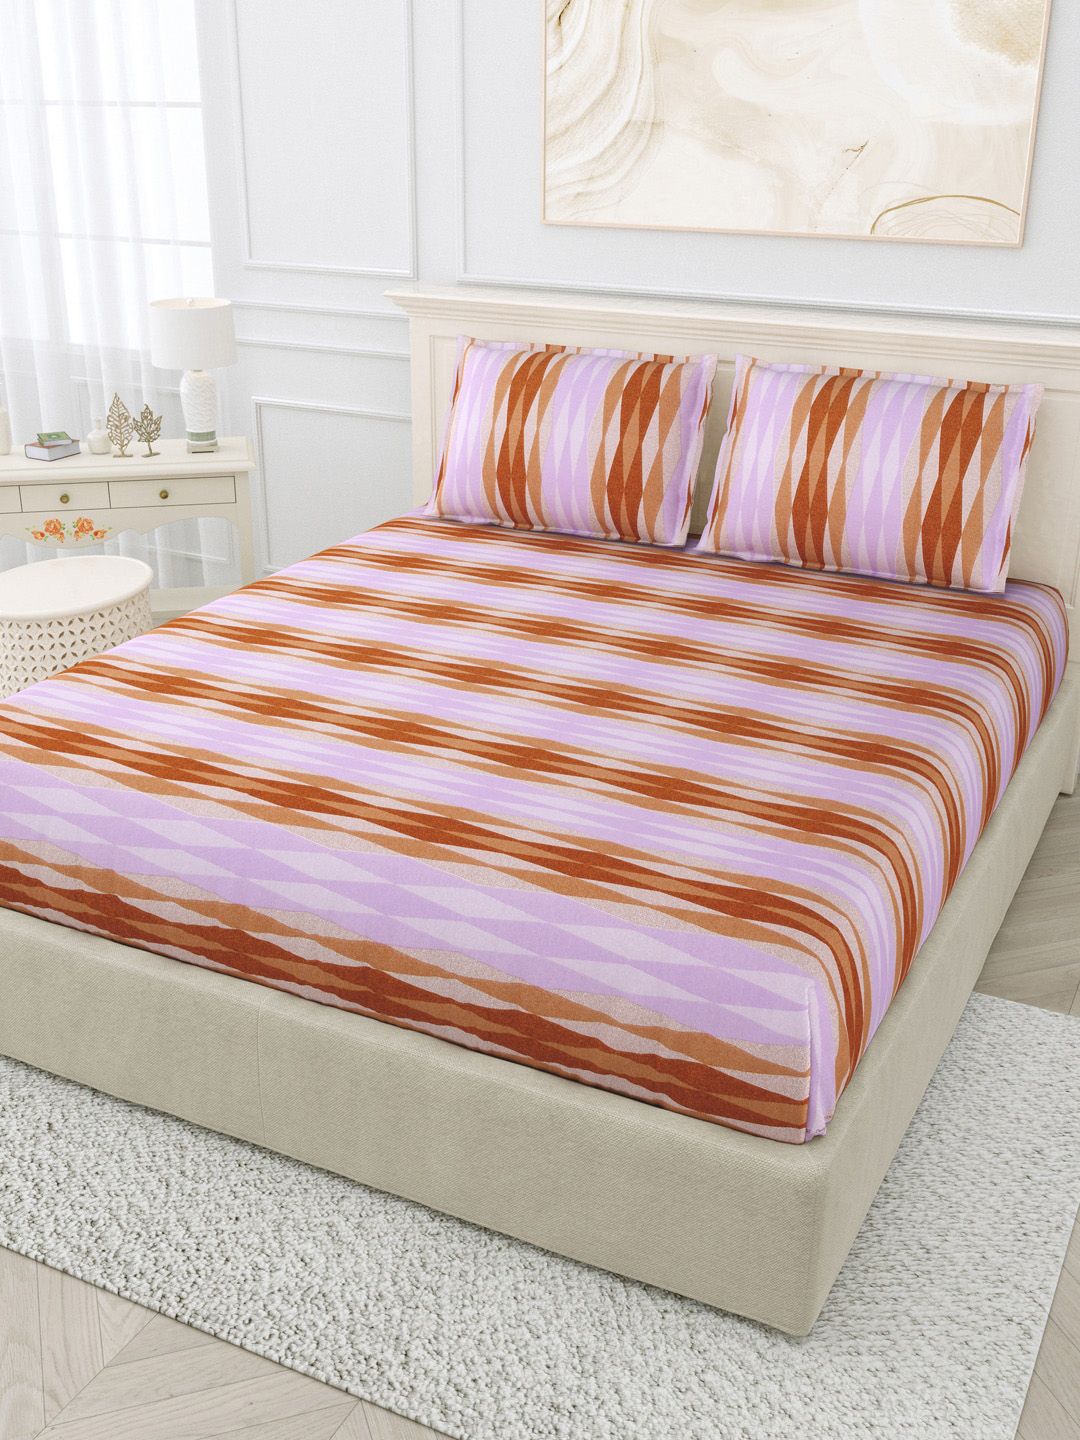 BOMBAY DYEING Unisex Multi Bedsheets Price in India